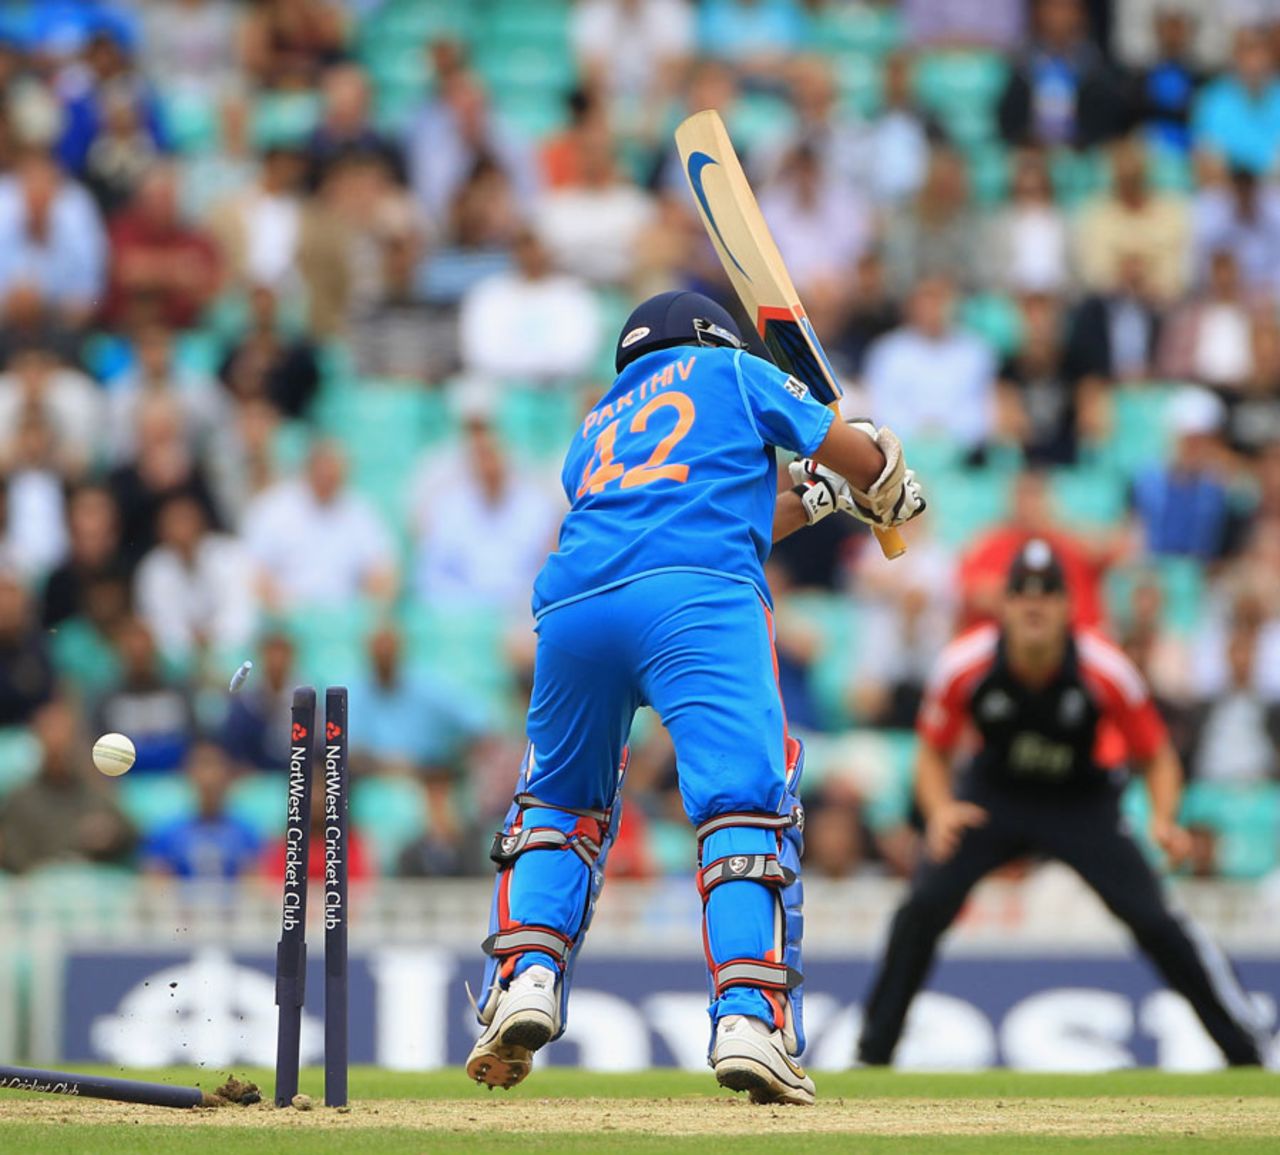 Parthiv Patel could not handle James Anderson at The Oval, England v India, 3rd ODI, The Oval, September 9 2011